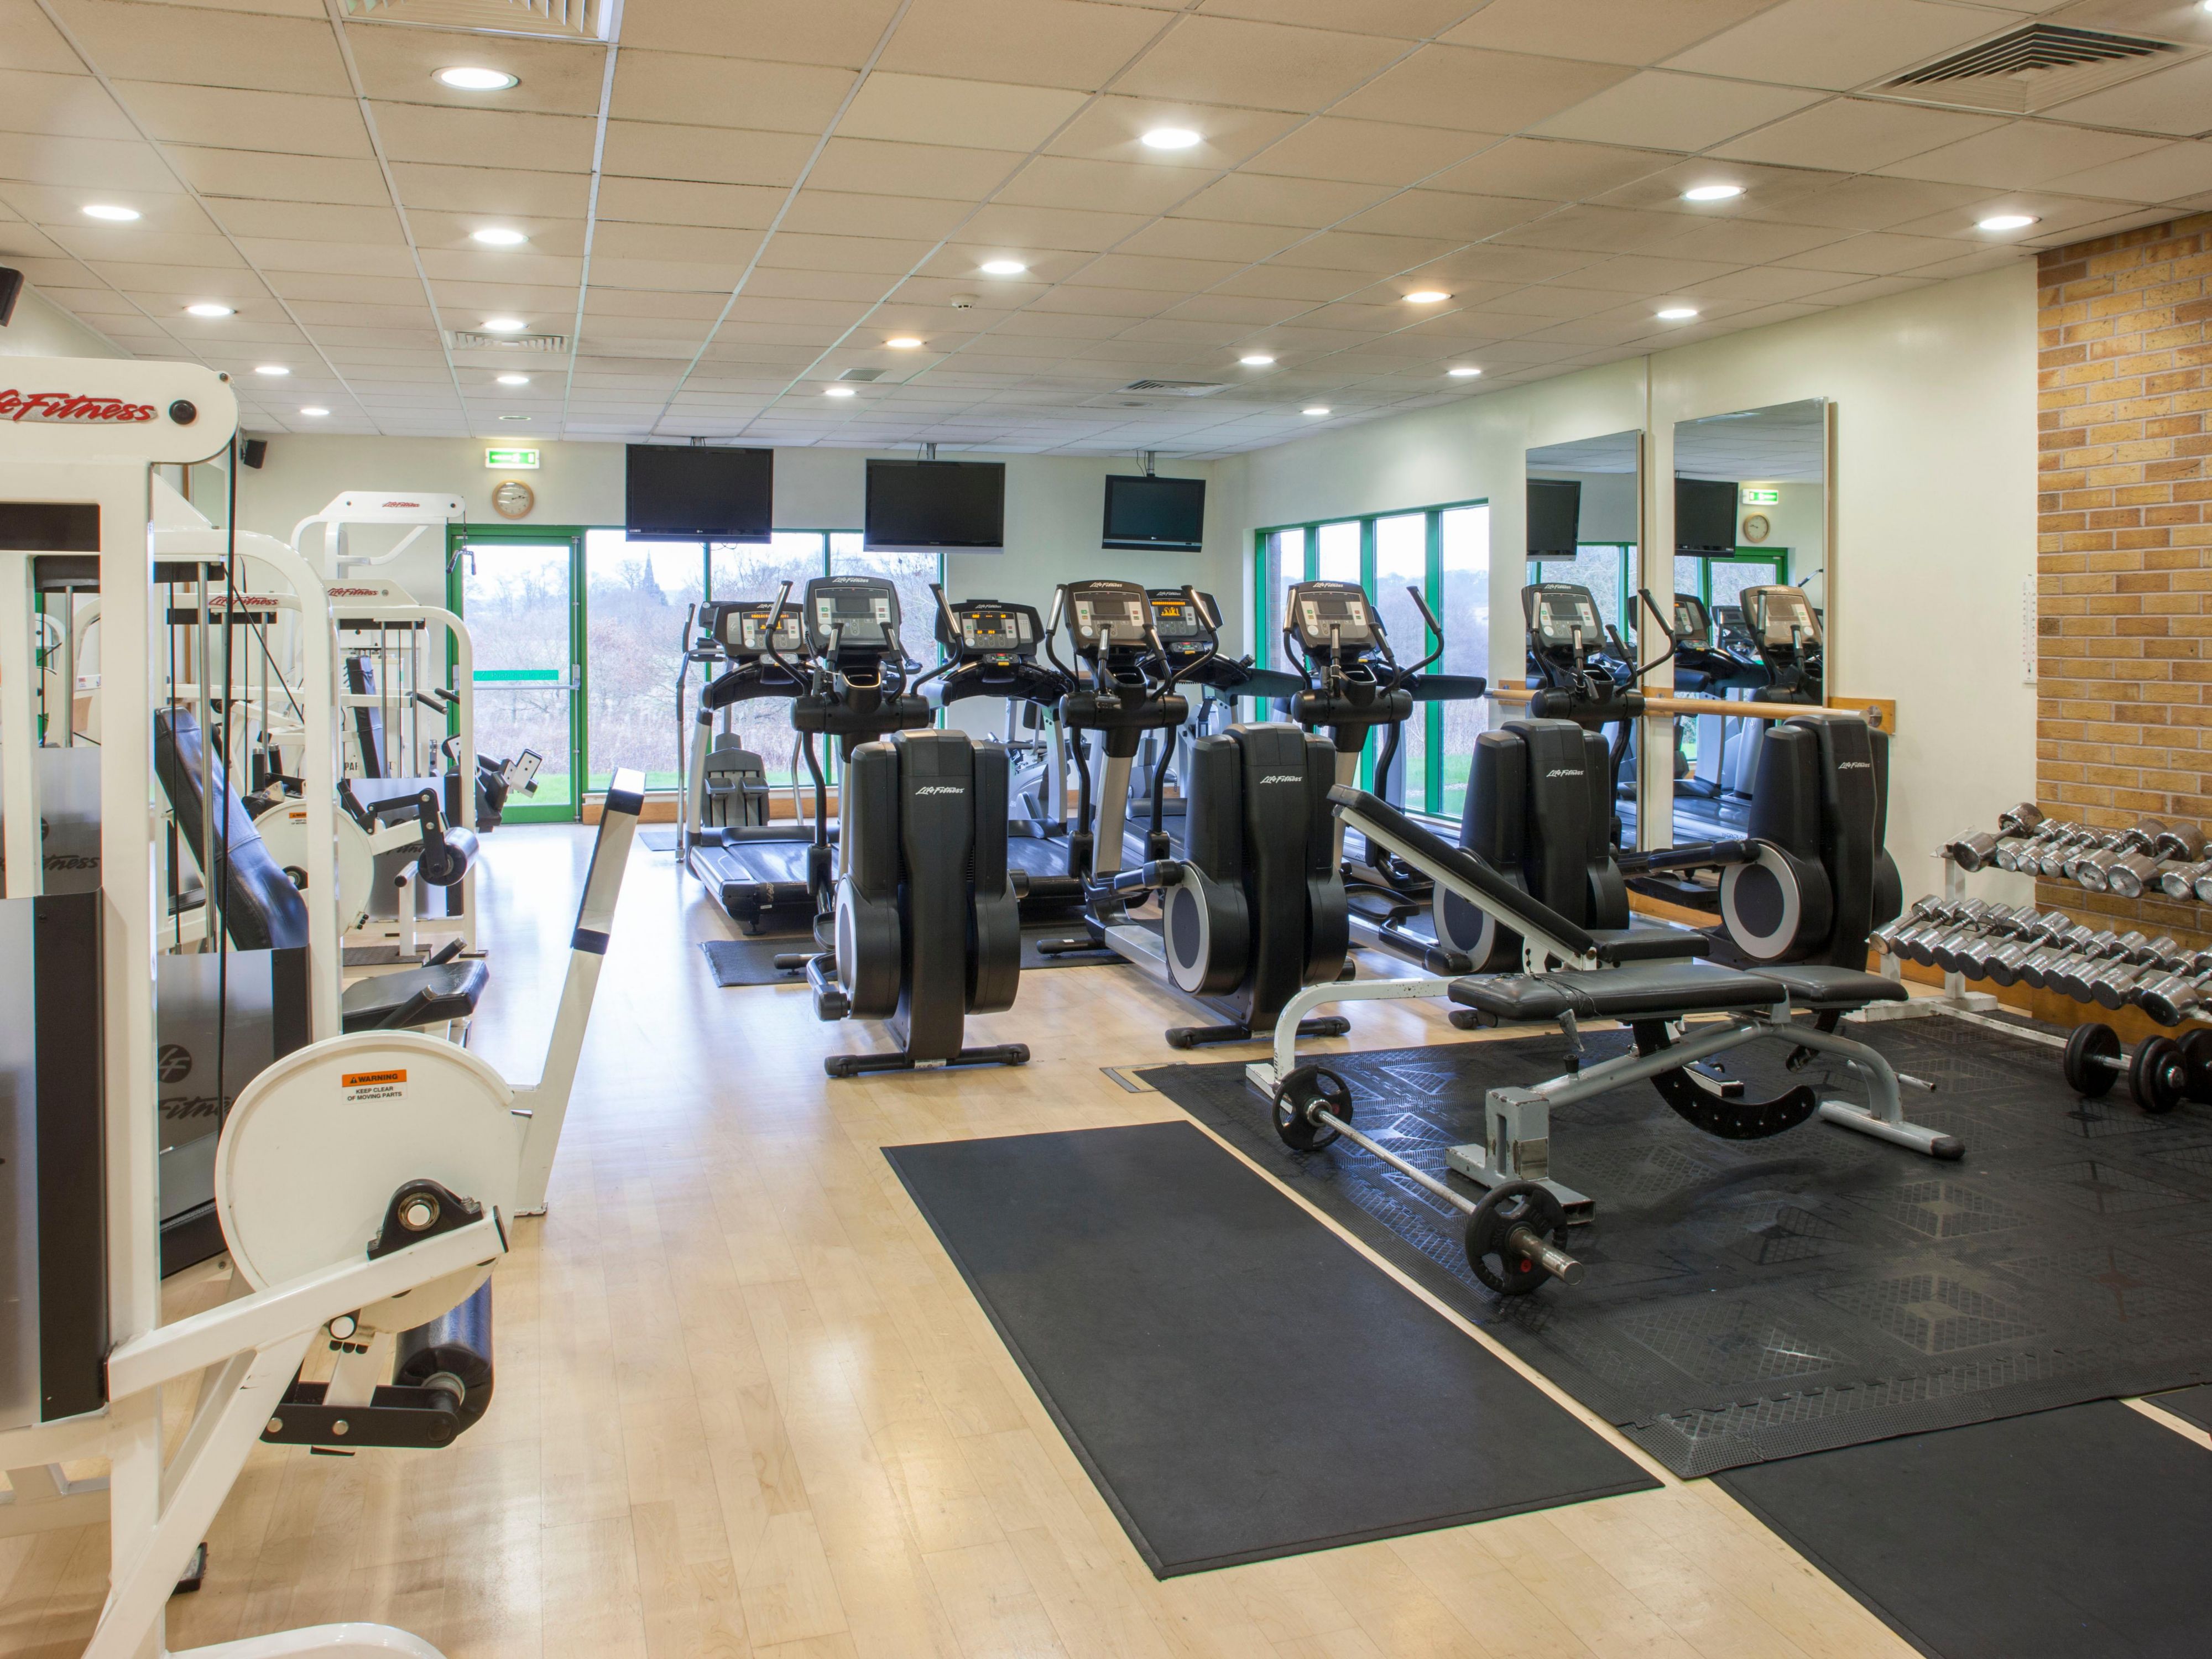 The You Fit Birmingham Health Club offers a fully equipped gym, dance studio, 15-metre swimming pool, steam room, sauna and whirlpool.
Located within the You Fit Health Club is La Bella Skin Clinic & Spa. Treatments available include: facials, massage, waxing, laser hair removal, manicures, pedicures.